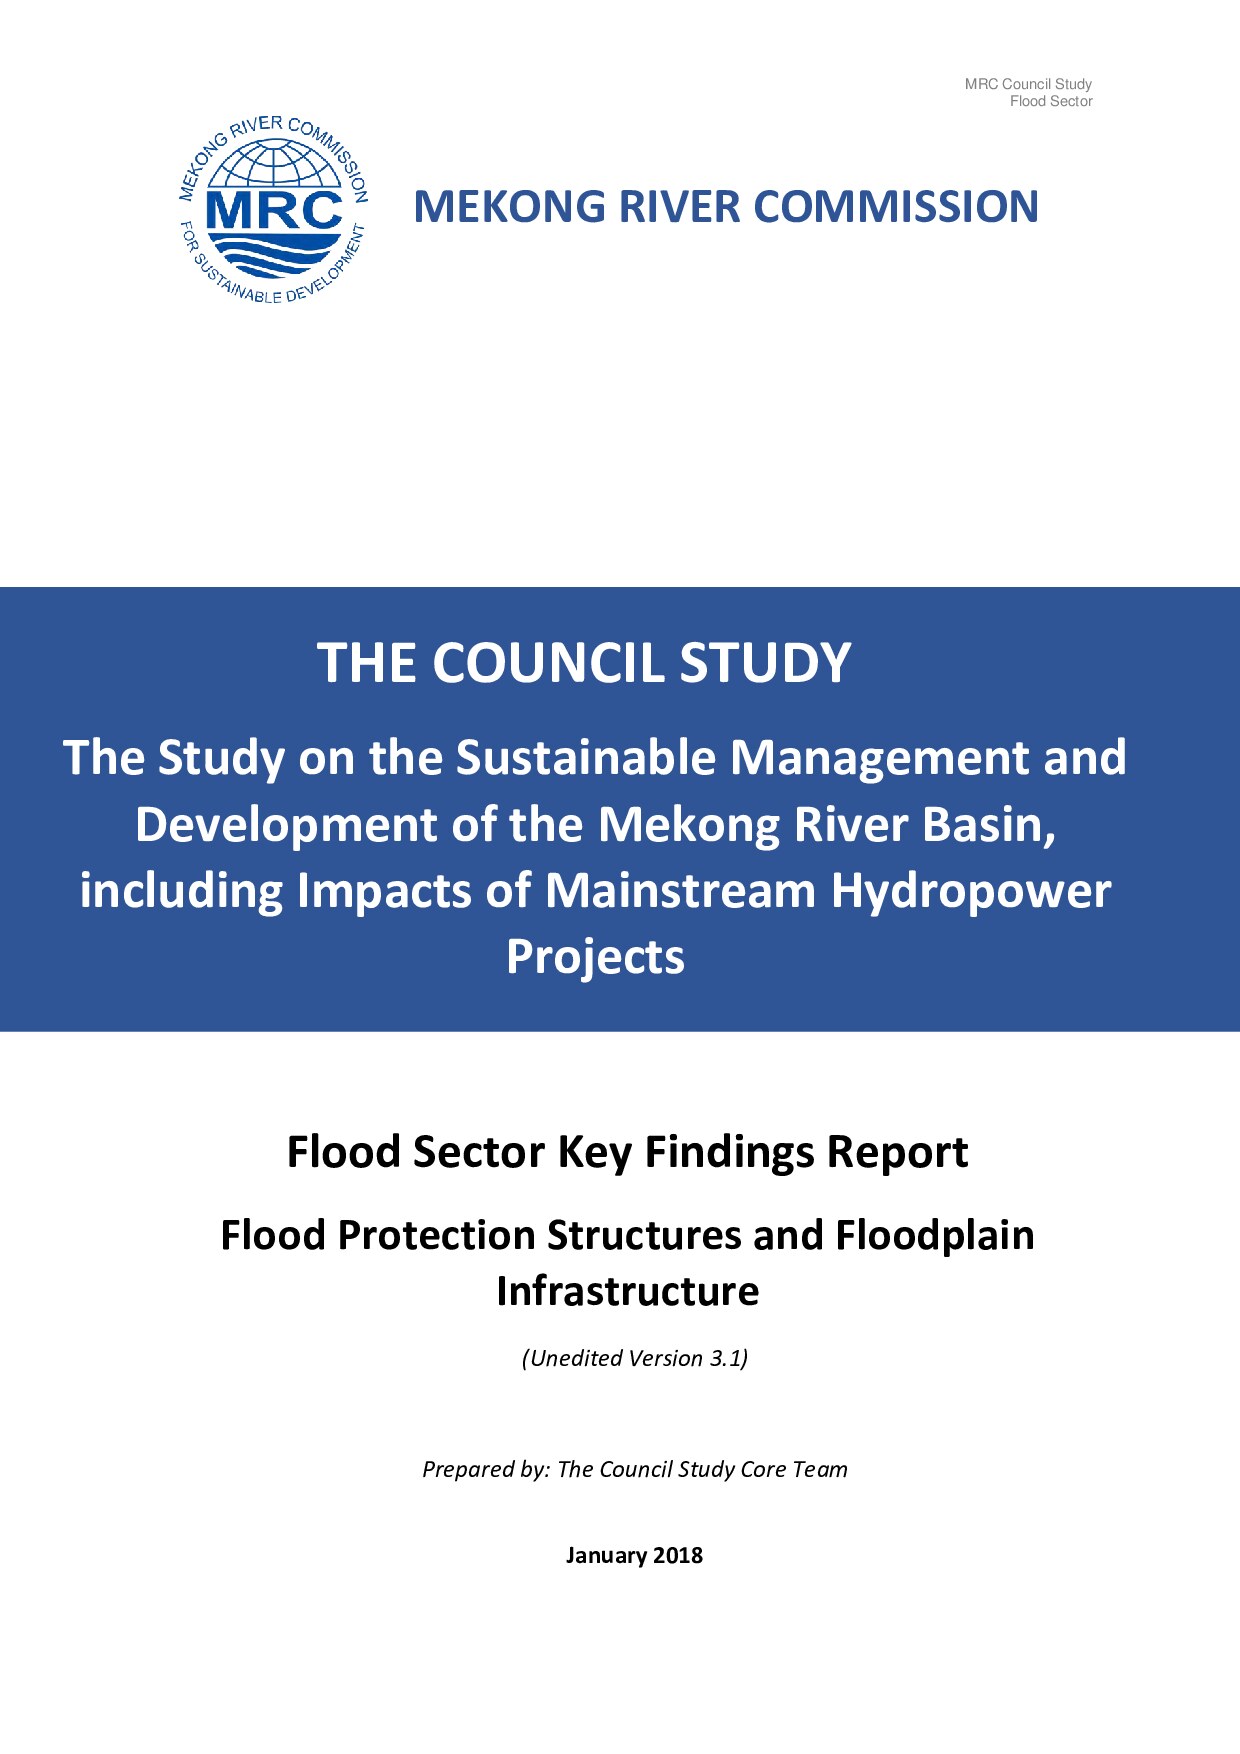 Flood Sector Key Findings Report Flood Protection Structures and Floodplain Infrastructure